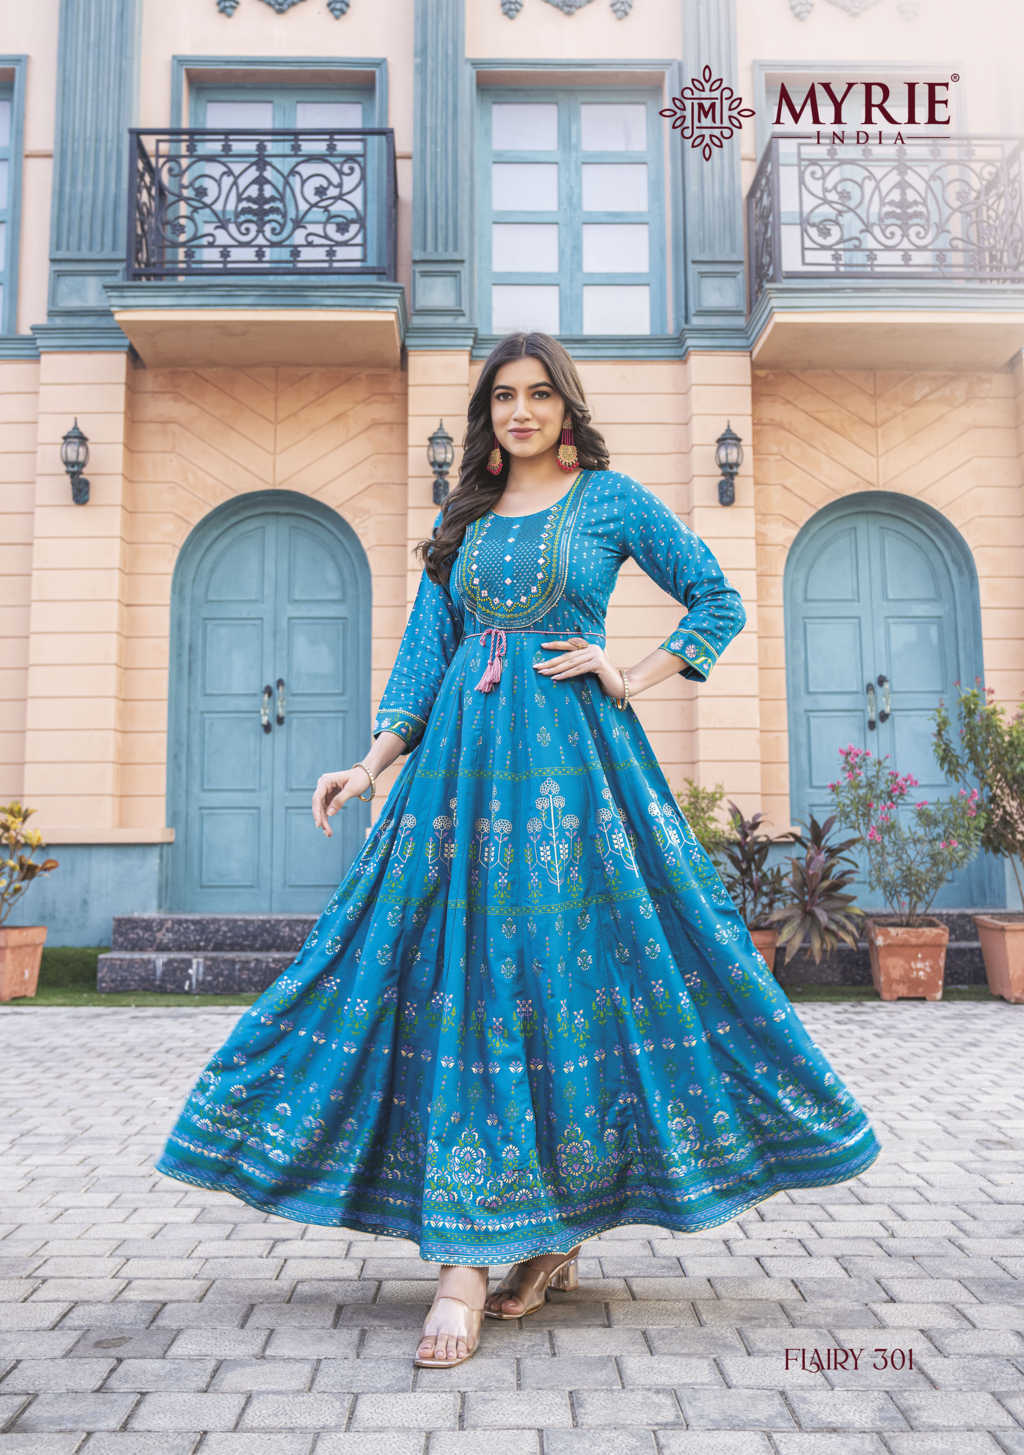 Mamta Vol 1 Dolphin Cotton With Flair And Anarkali Embroidery Work Kurti  Sky Blue Color DN 1002